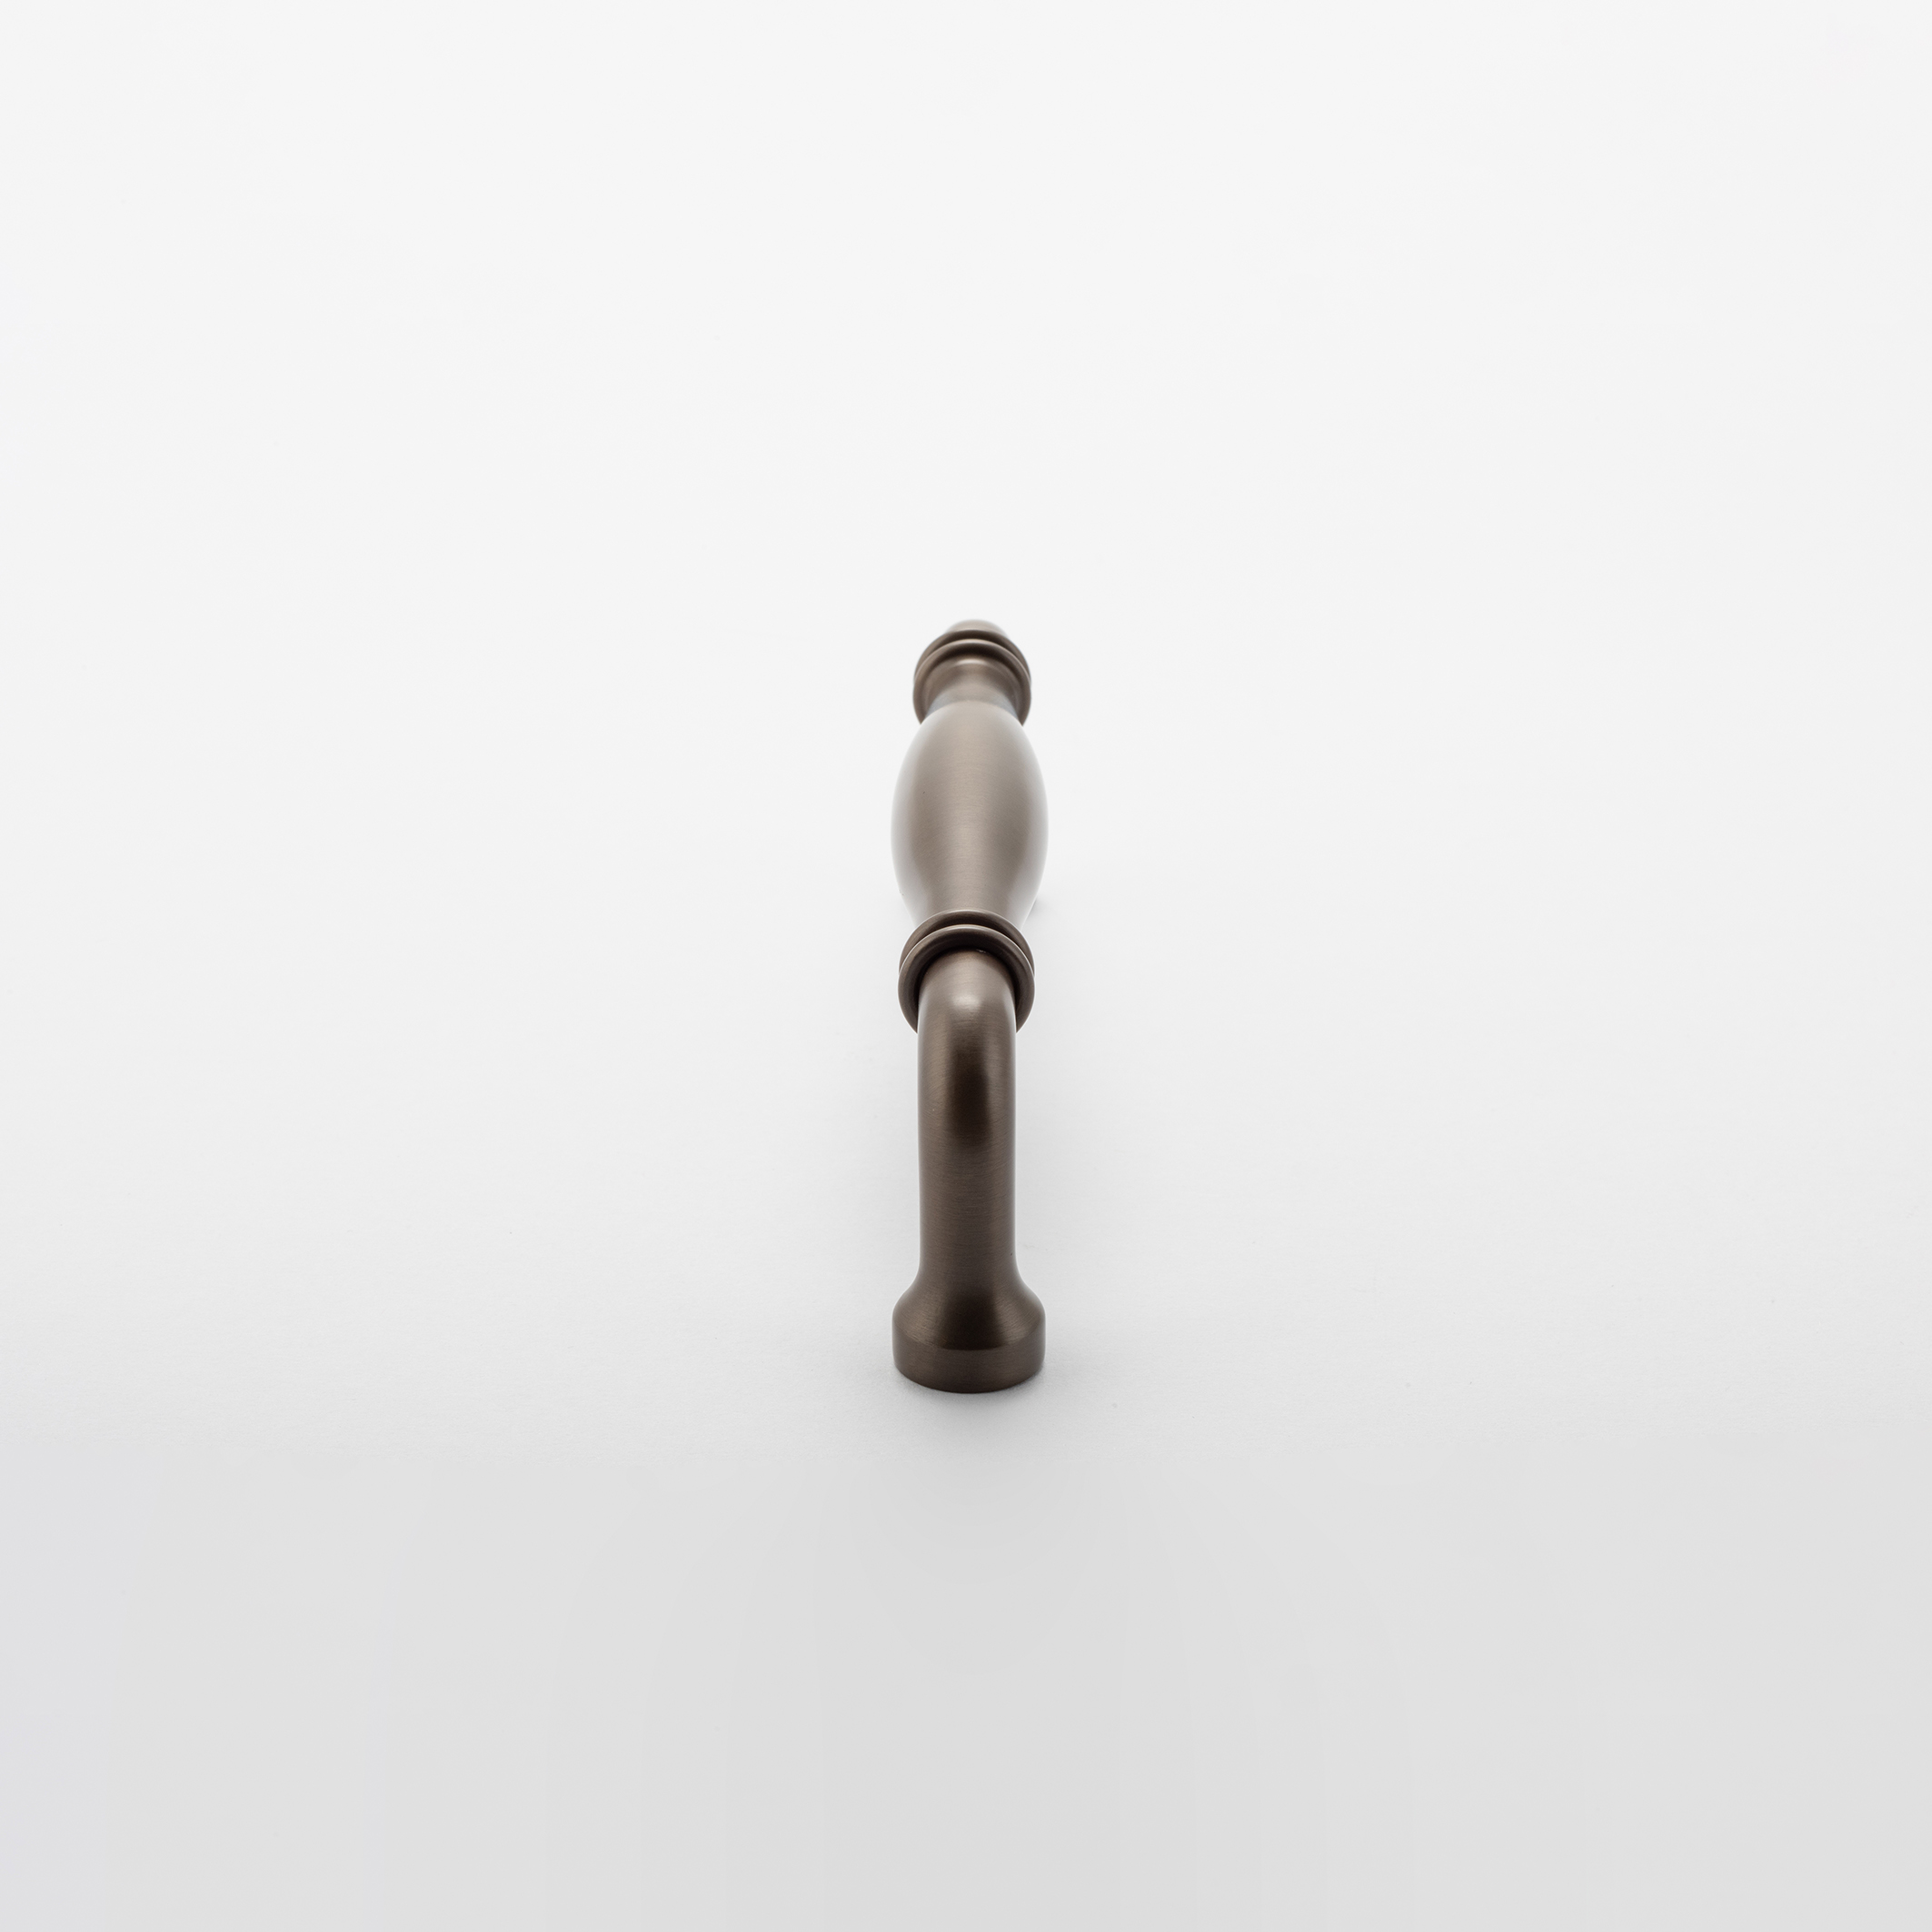 21101B - Sarlat Cabinet Pull with Backplate - CTC450mm - Signature Brass